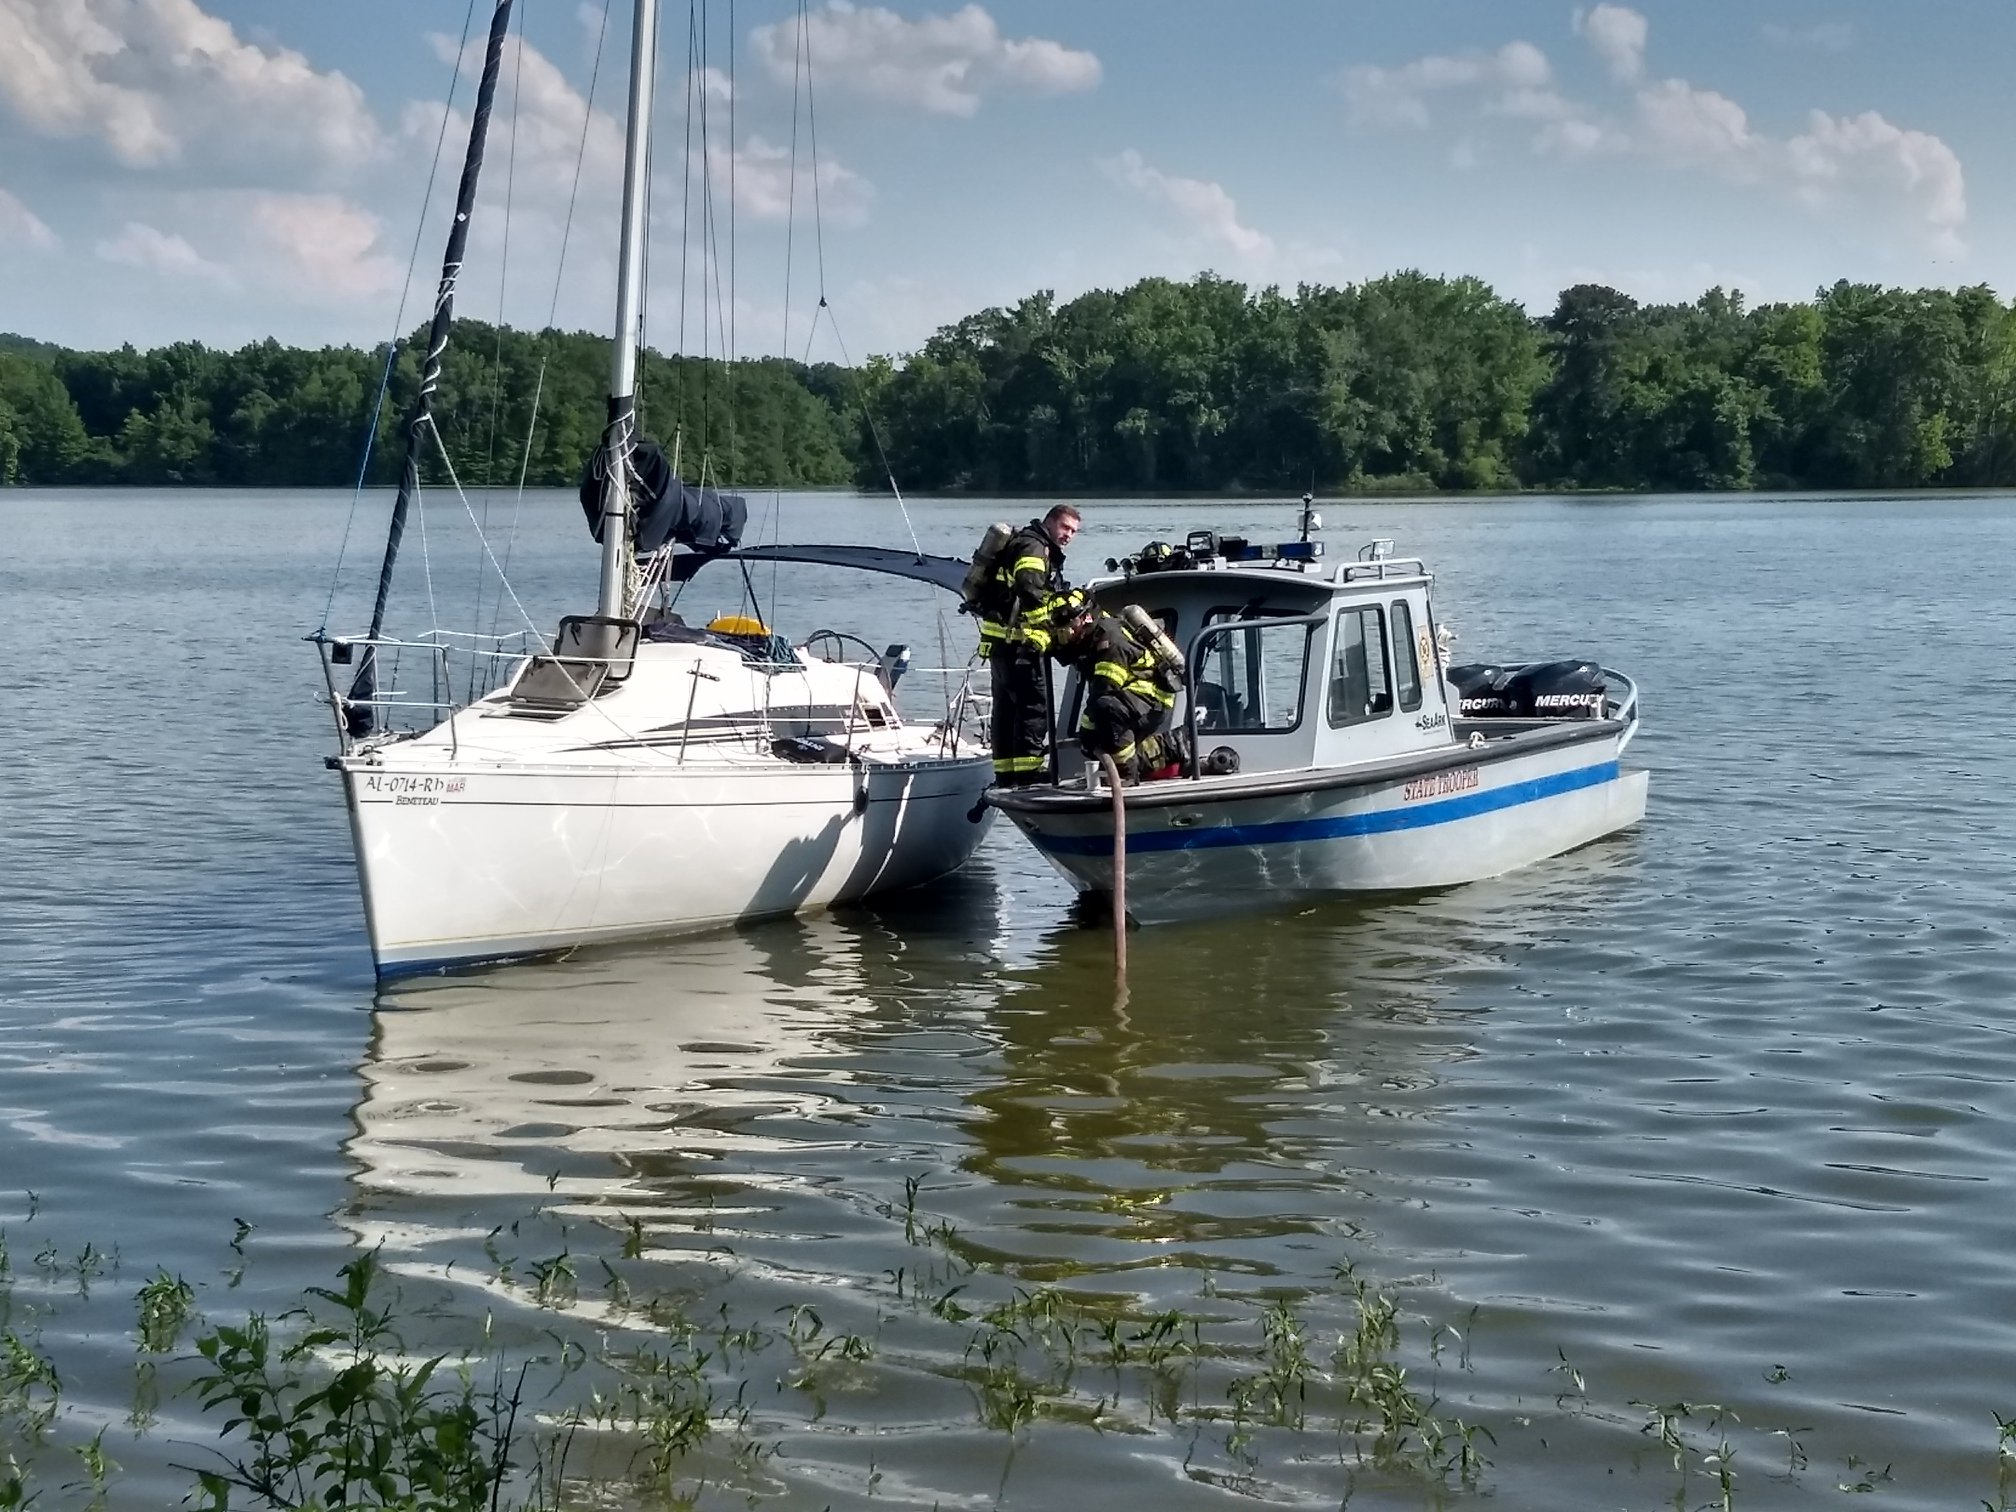 Trussville boy hurt after boat hits power line